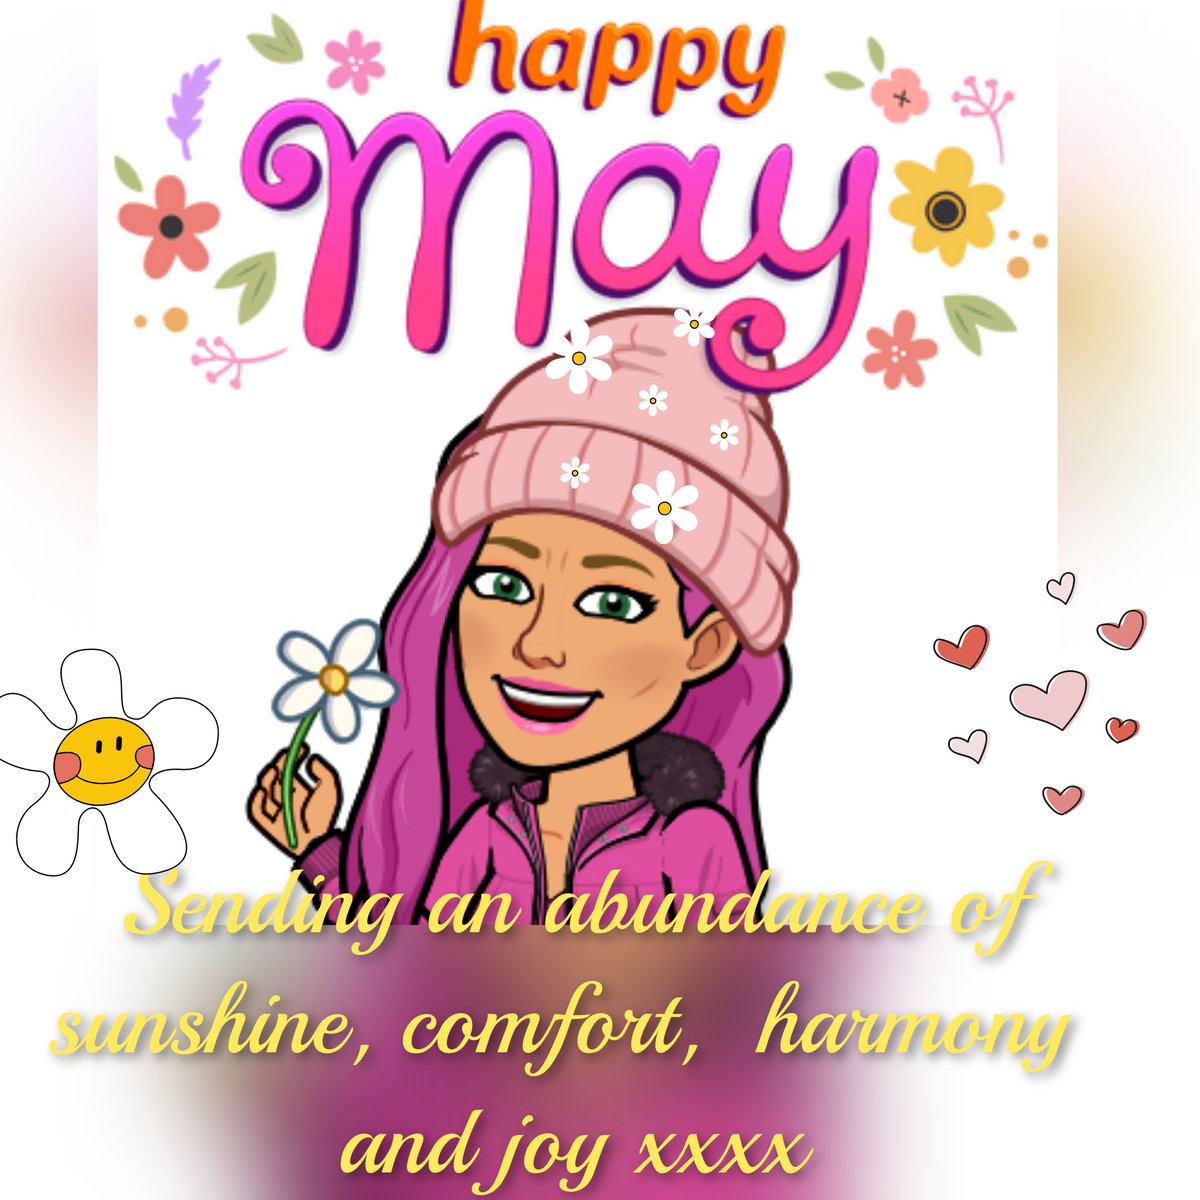 May you find your flow and the magic of life xxx

Sending an abundance of lightness and love xxxxx

#May #joy #selfcompassion #selflove #mind #body #soul #soulhealing #spiritualconnection #consciousliving #beinthemoment #trusttheprocess